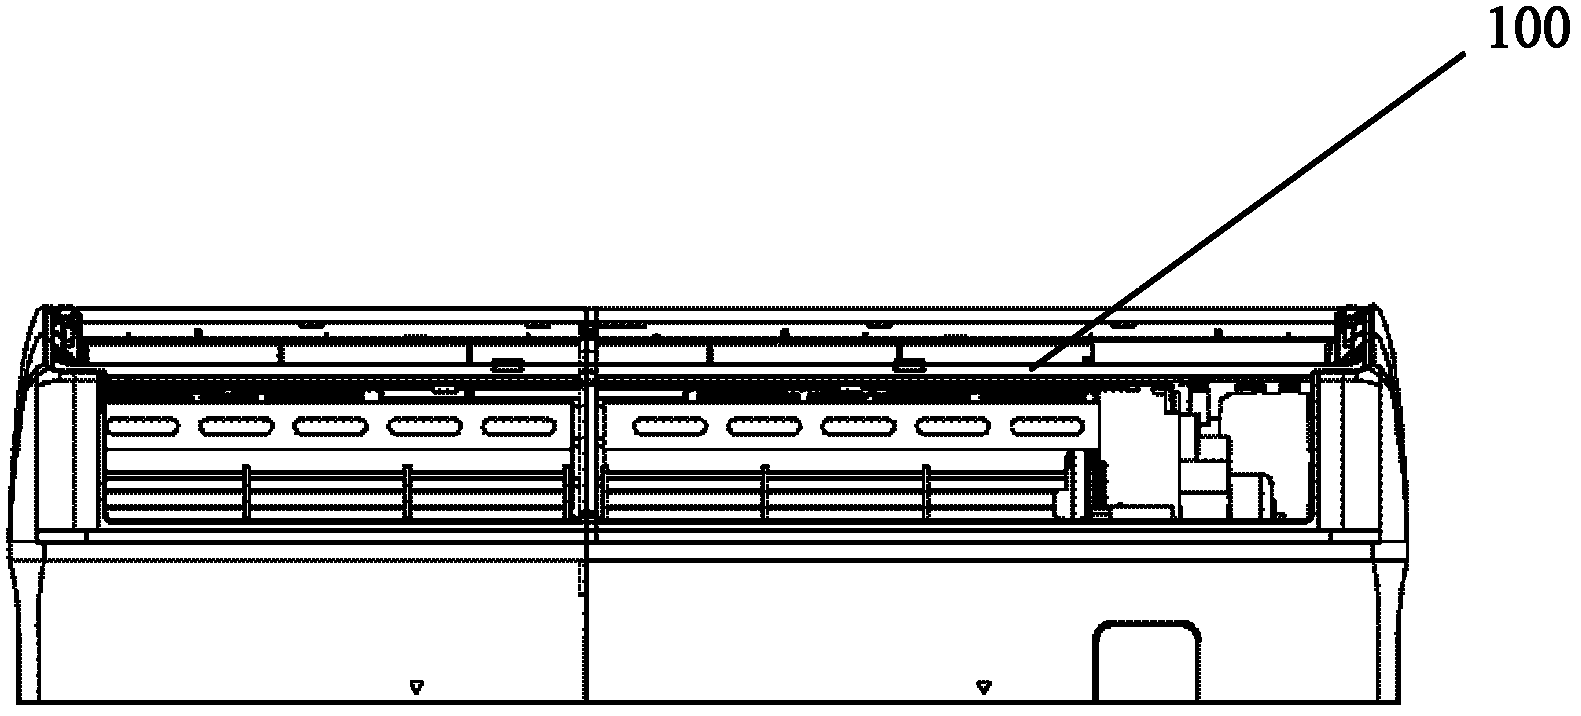 Evaporator, wall hanging structure and air-conditioner